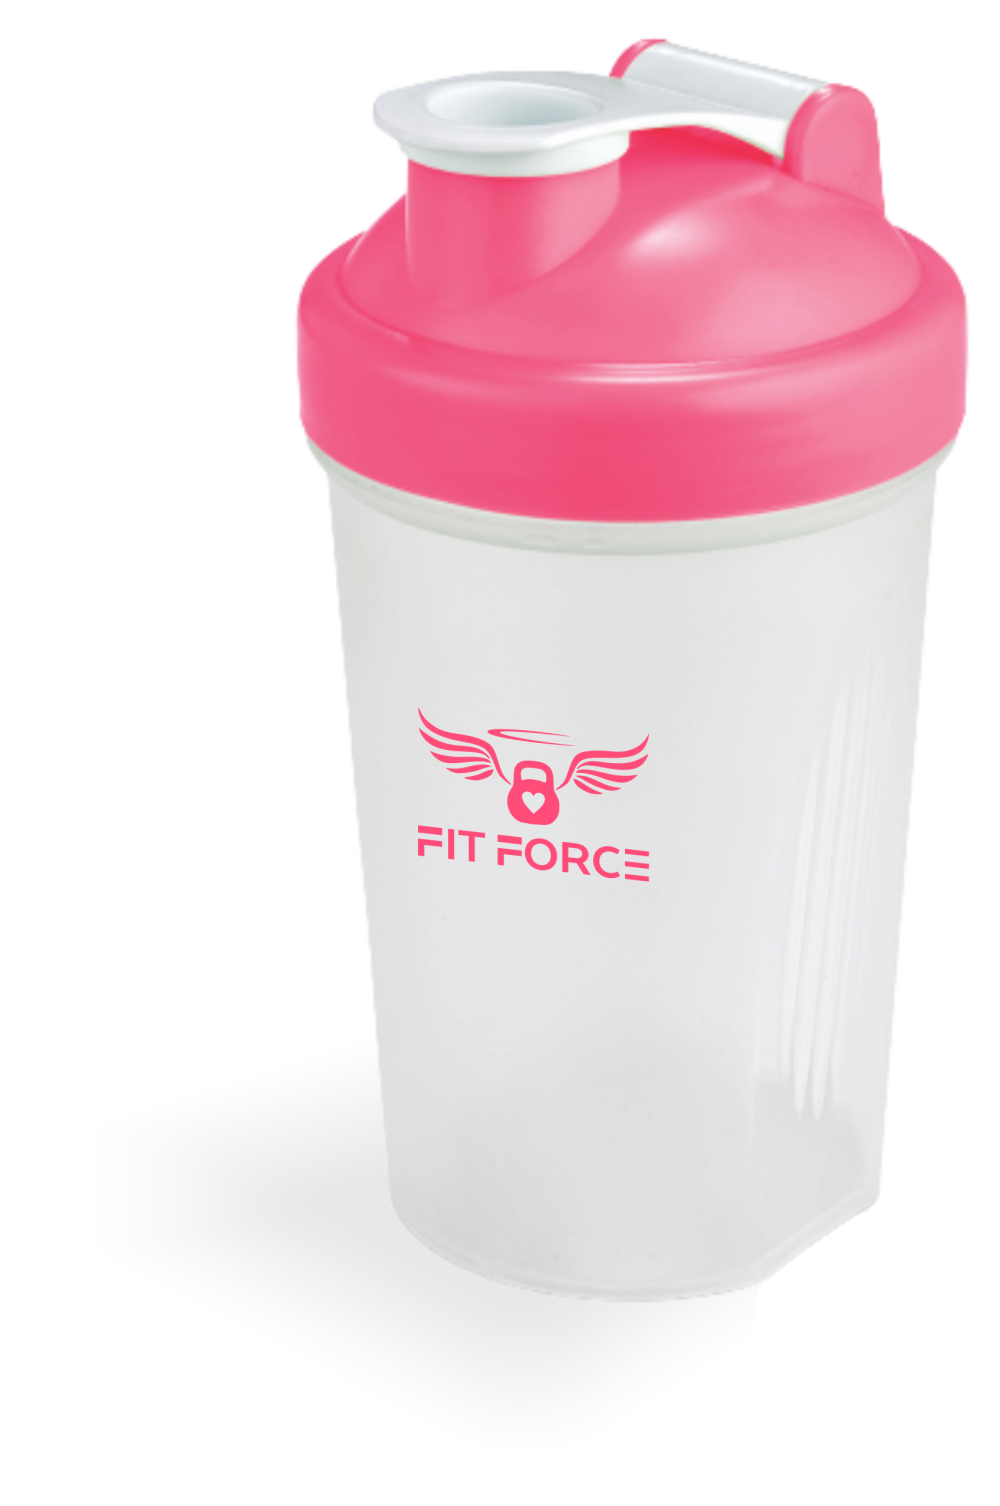 FitForce - Women’s Health and Fitness Products | Buy Now